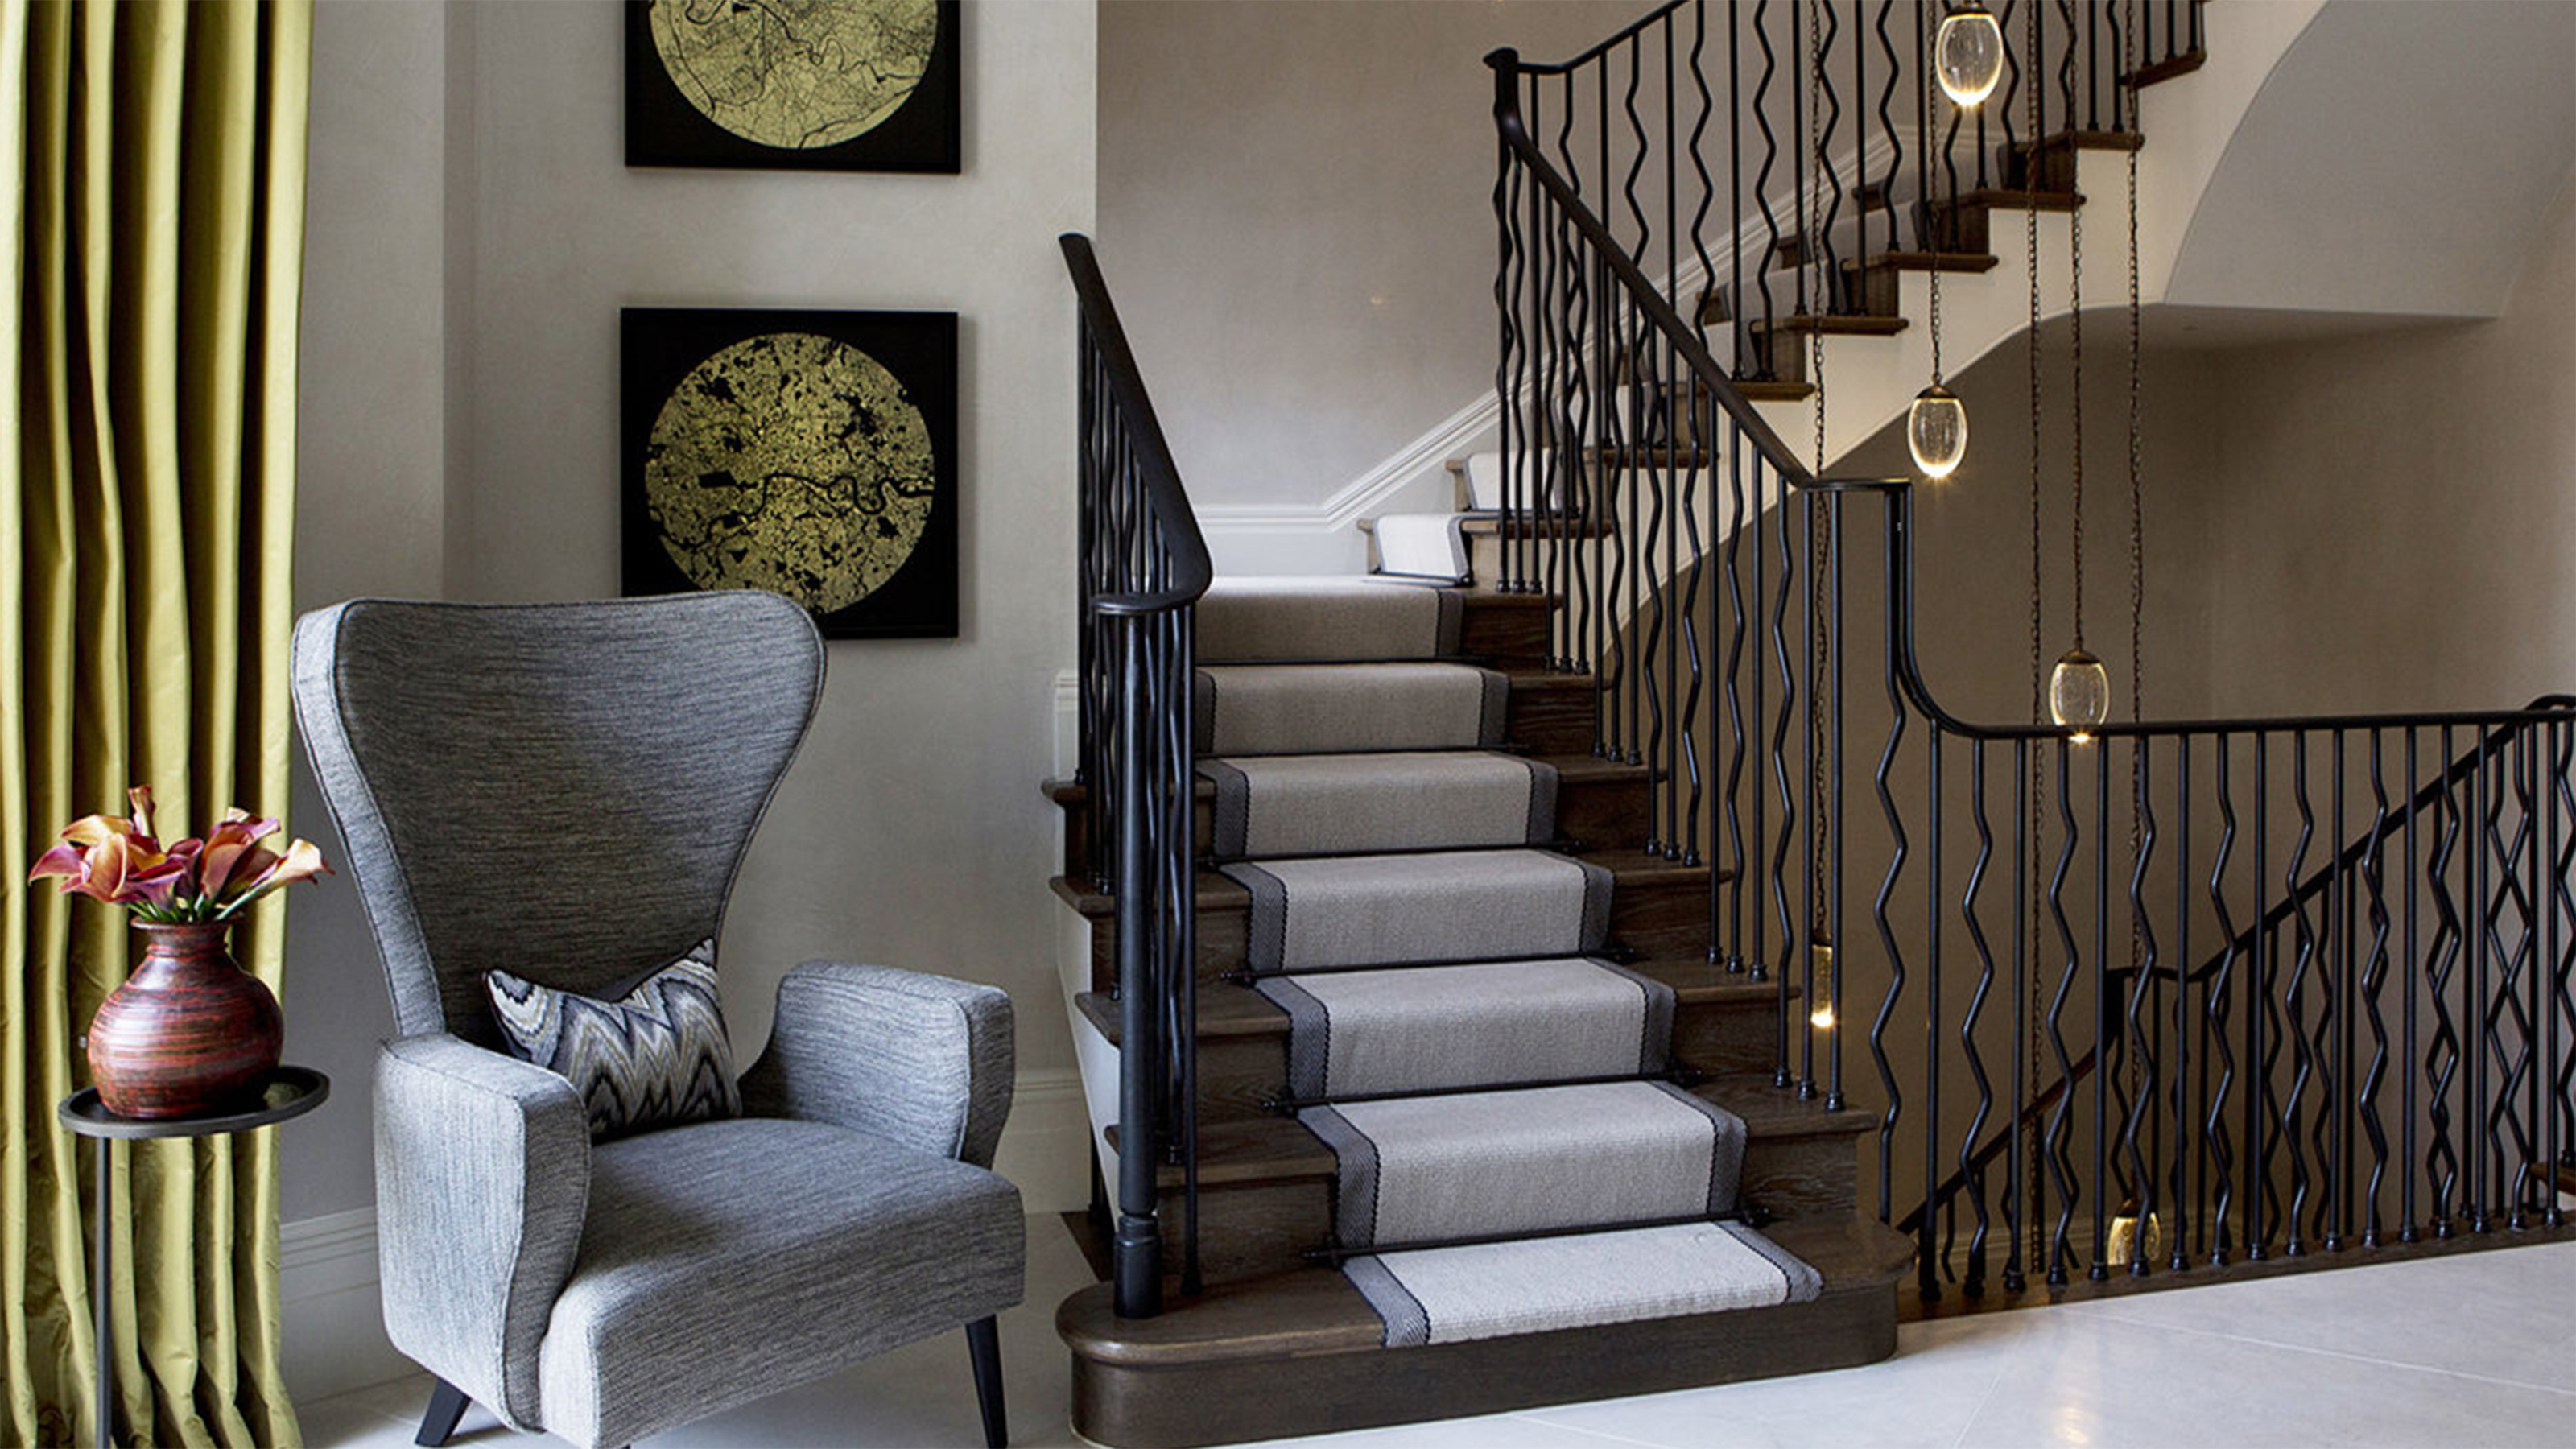 Staircase Lighting Ideas – 17 Styles To Light Up Your Treads | Real Homes